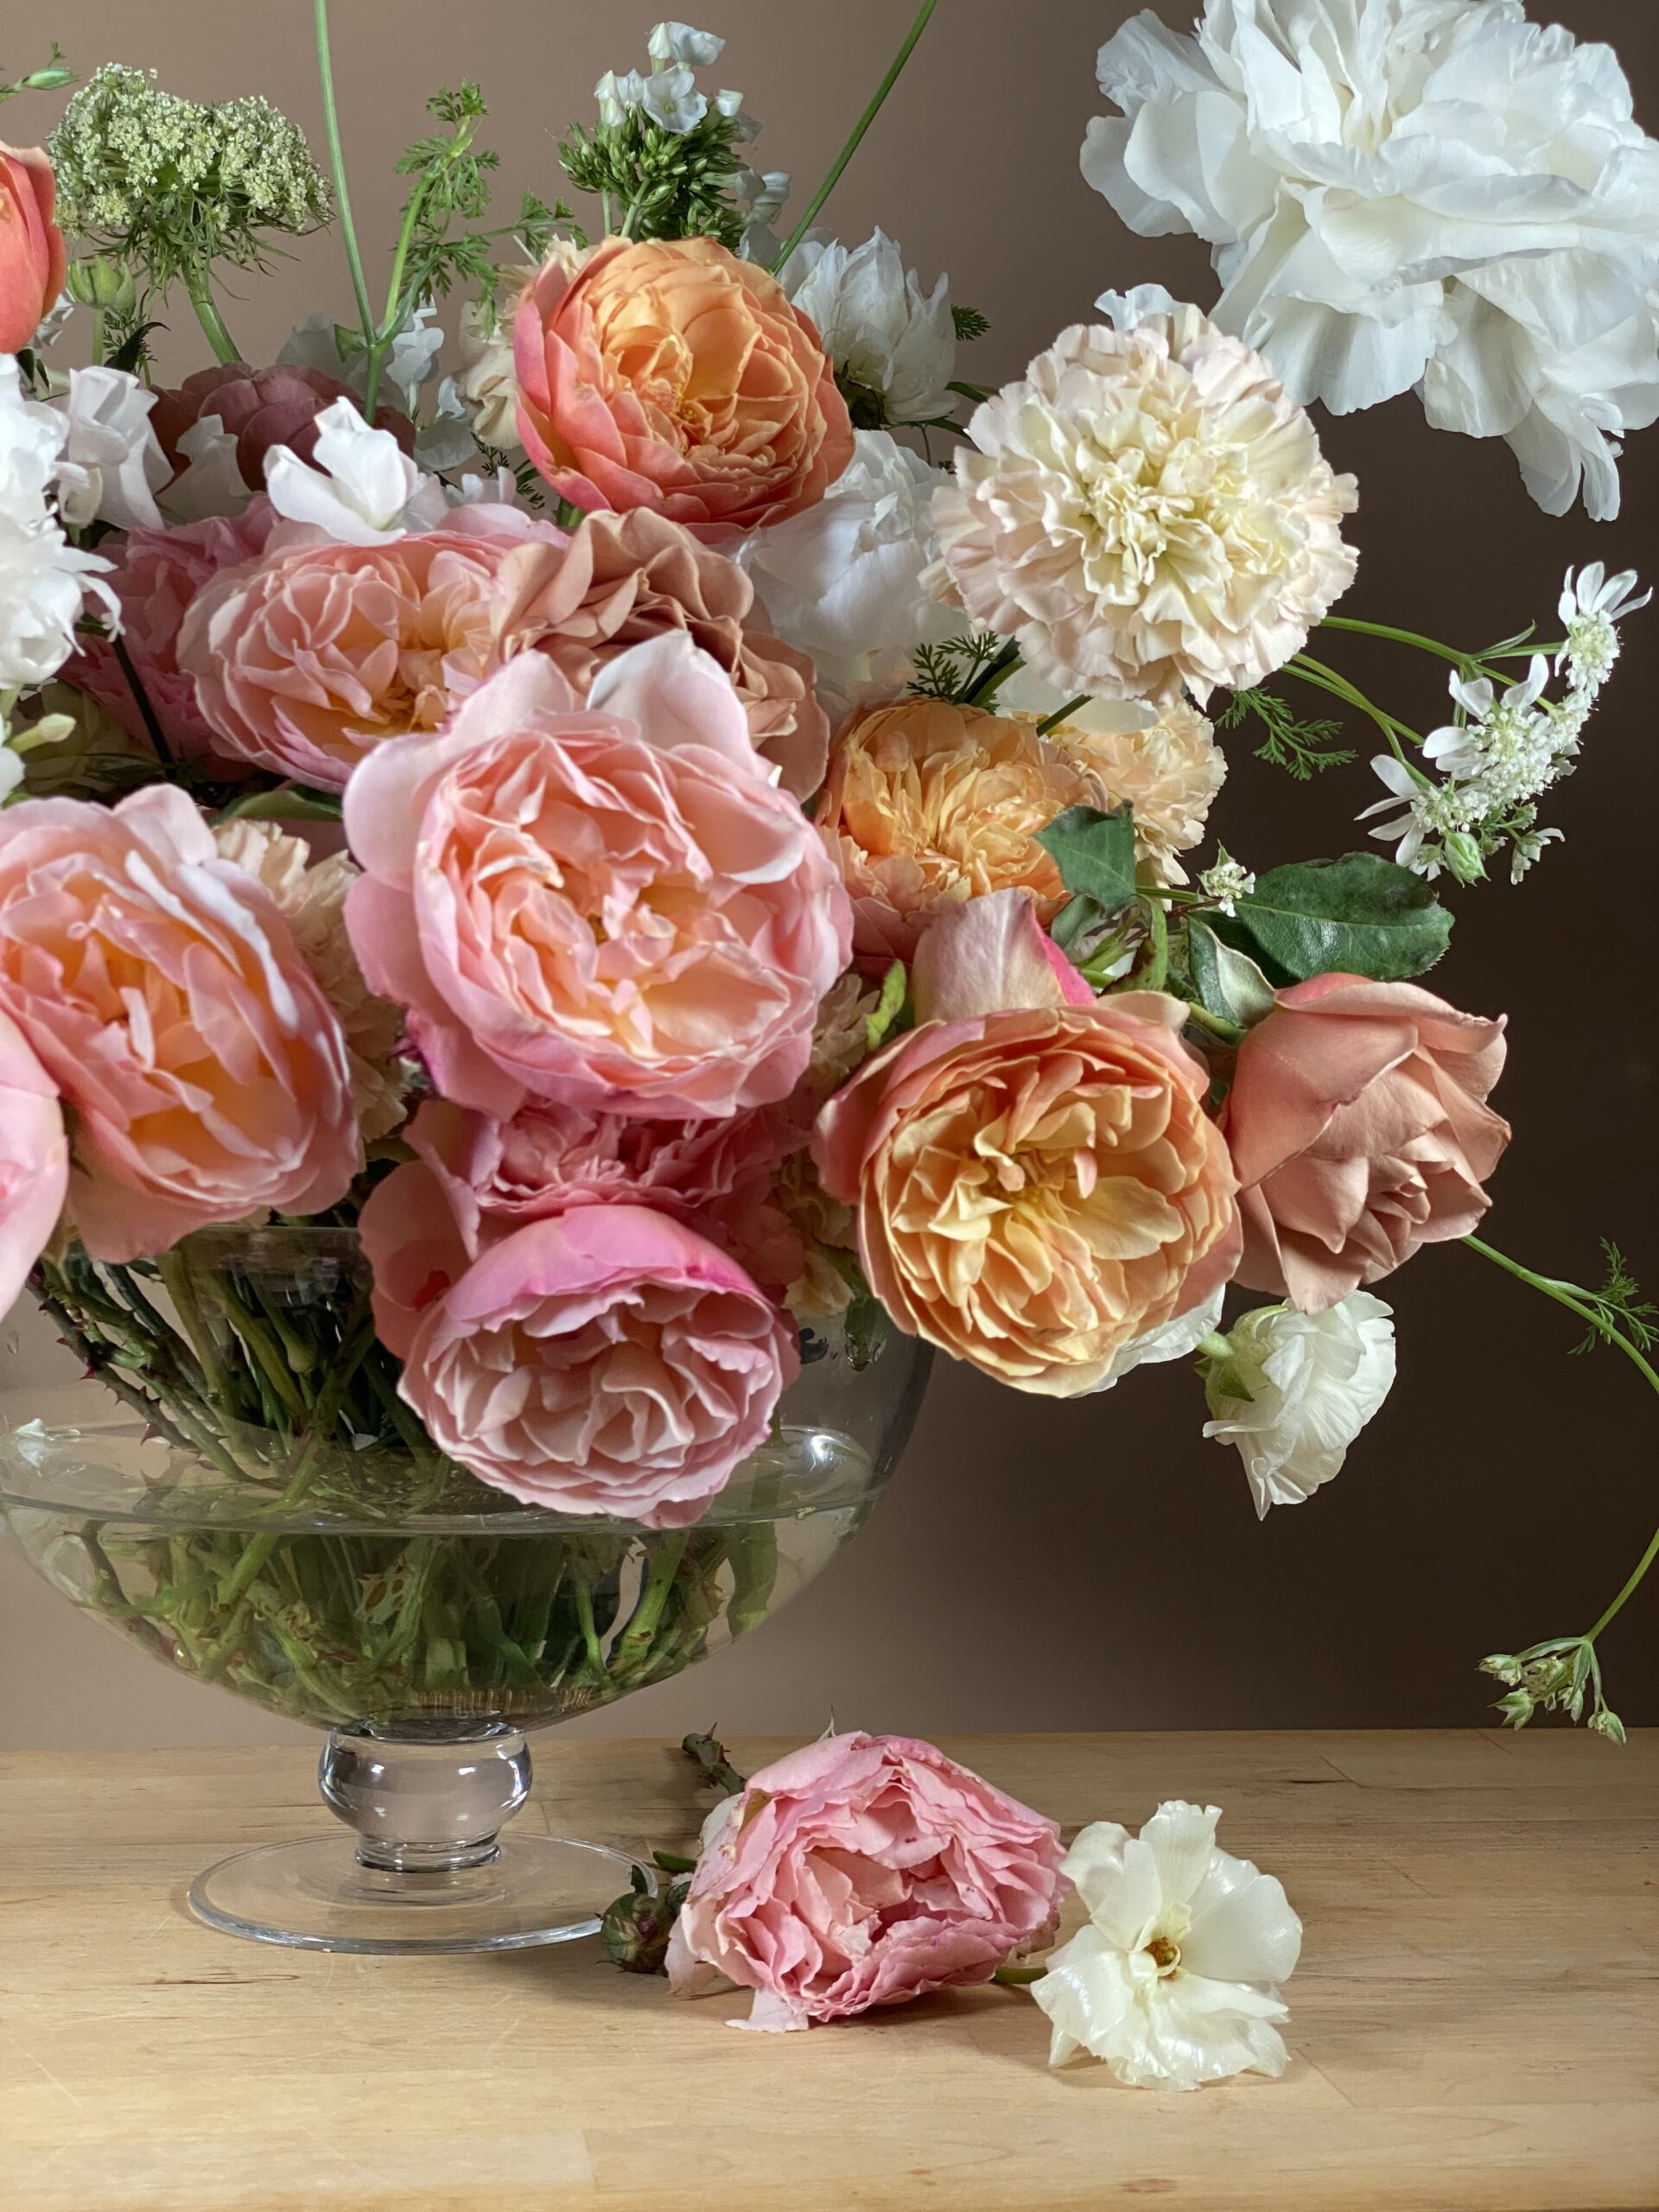 Rose Processing Tips the Floral Pros Use